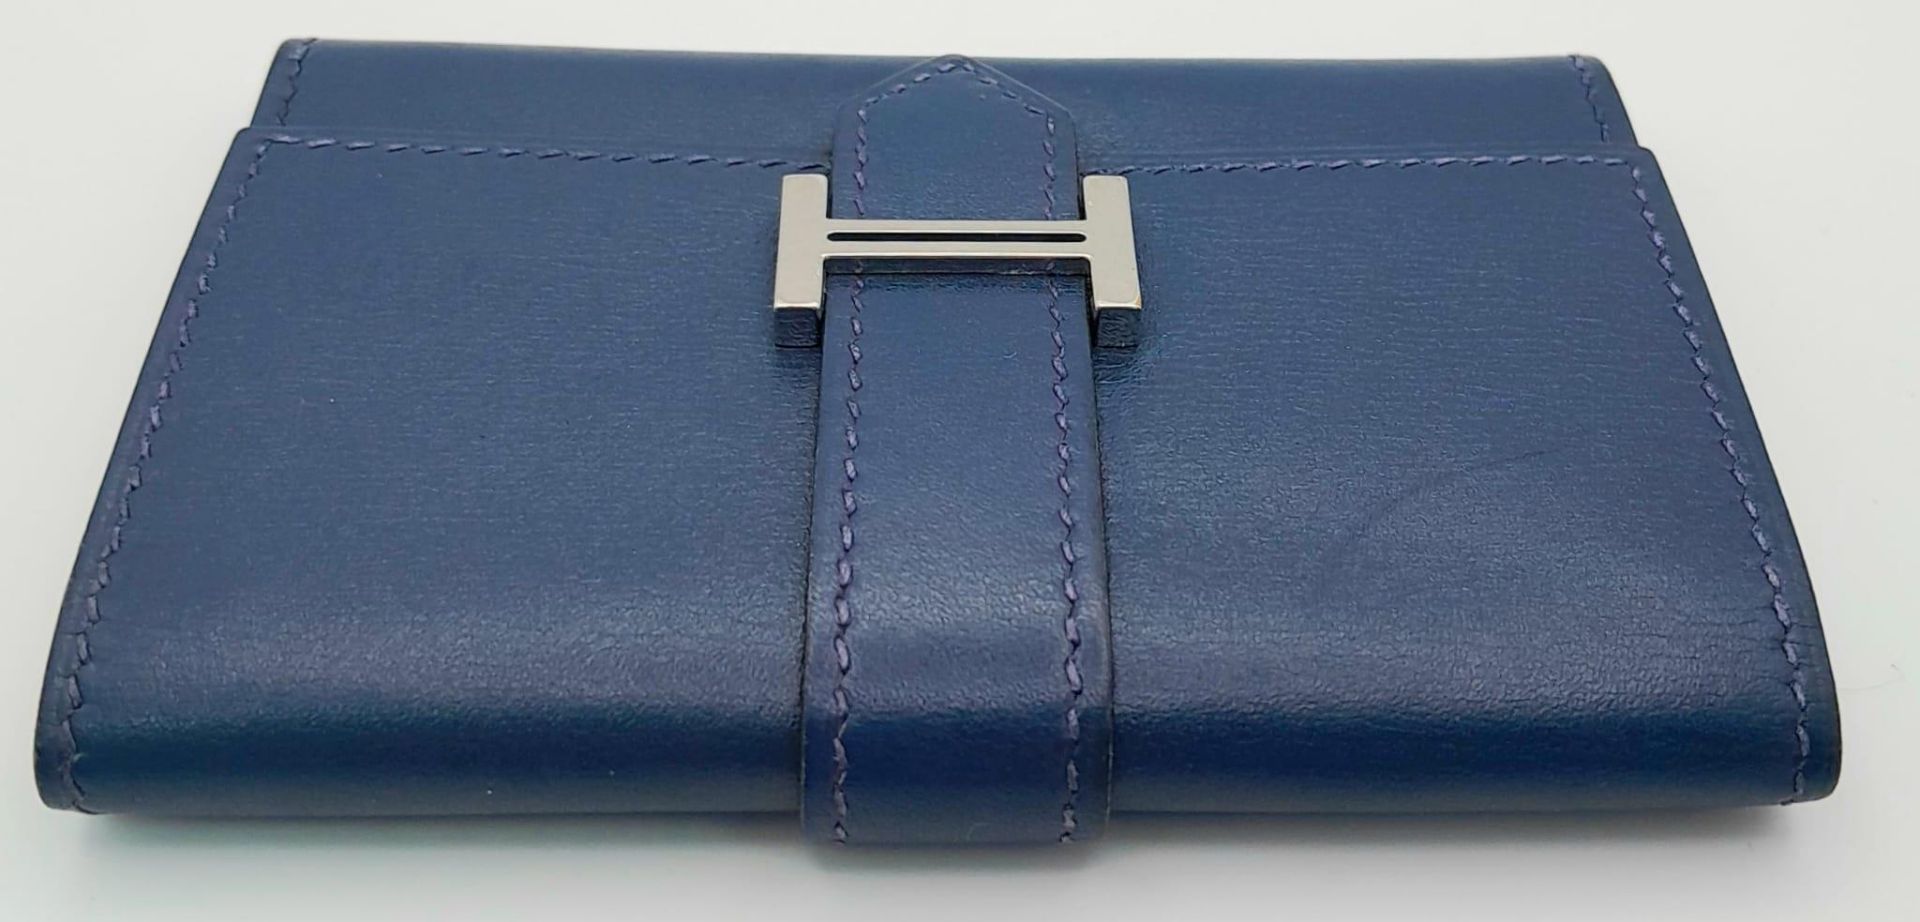 A Small Blue Leather Hermes Ladies Wallet. Flap design with Letter H branding. In good condition but - Image 4 of 7